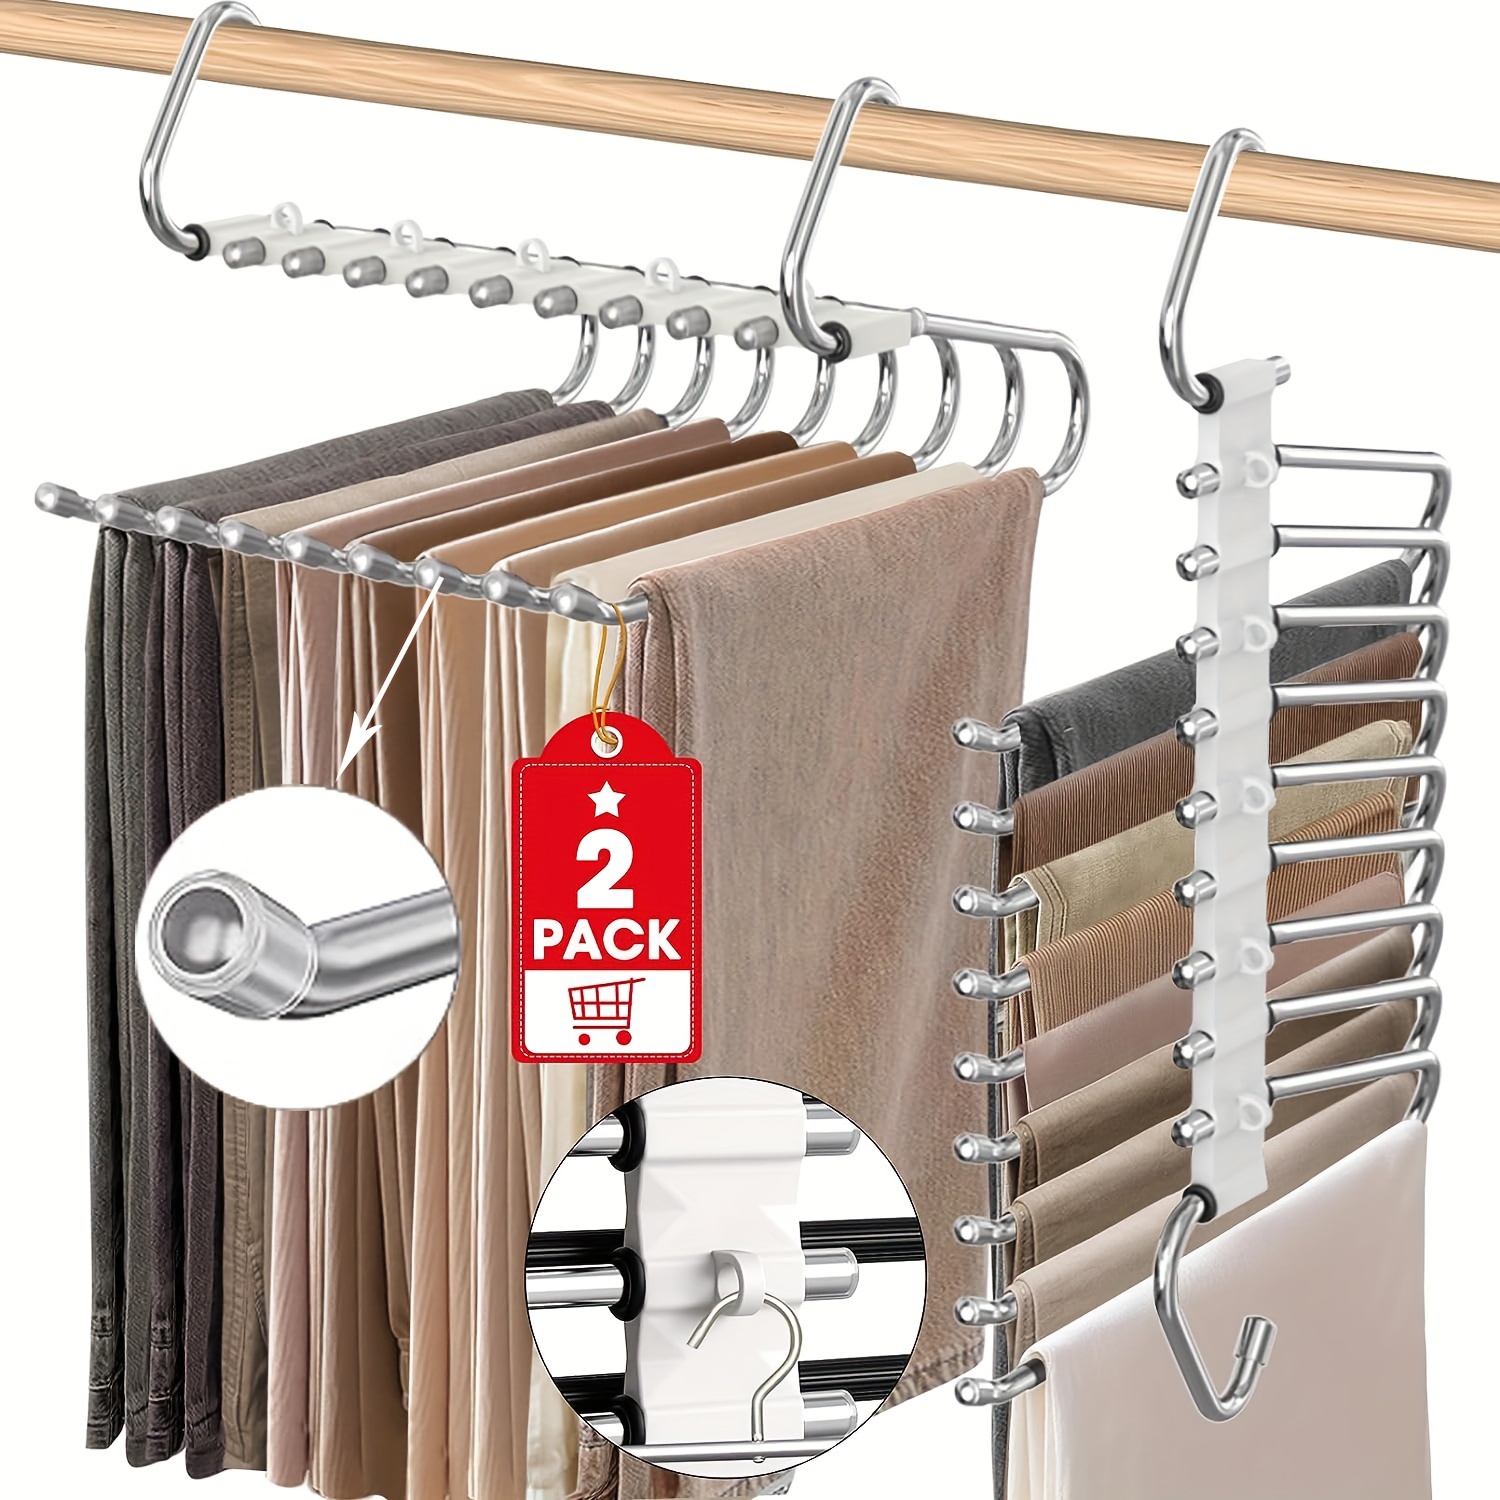 

2pcs, 9-layer Space Saving Pants Hangers - Non-slip Stainless Steel Rack With Hooks For Leggings, Trousers, And Clothing Organization